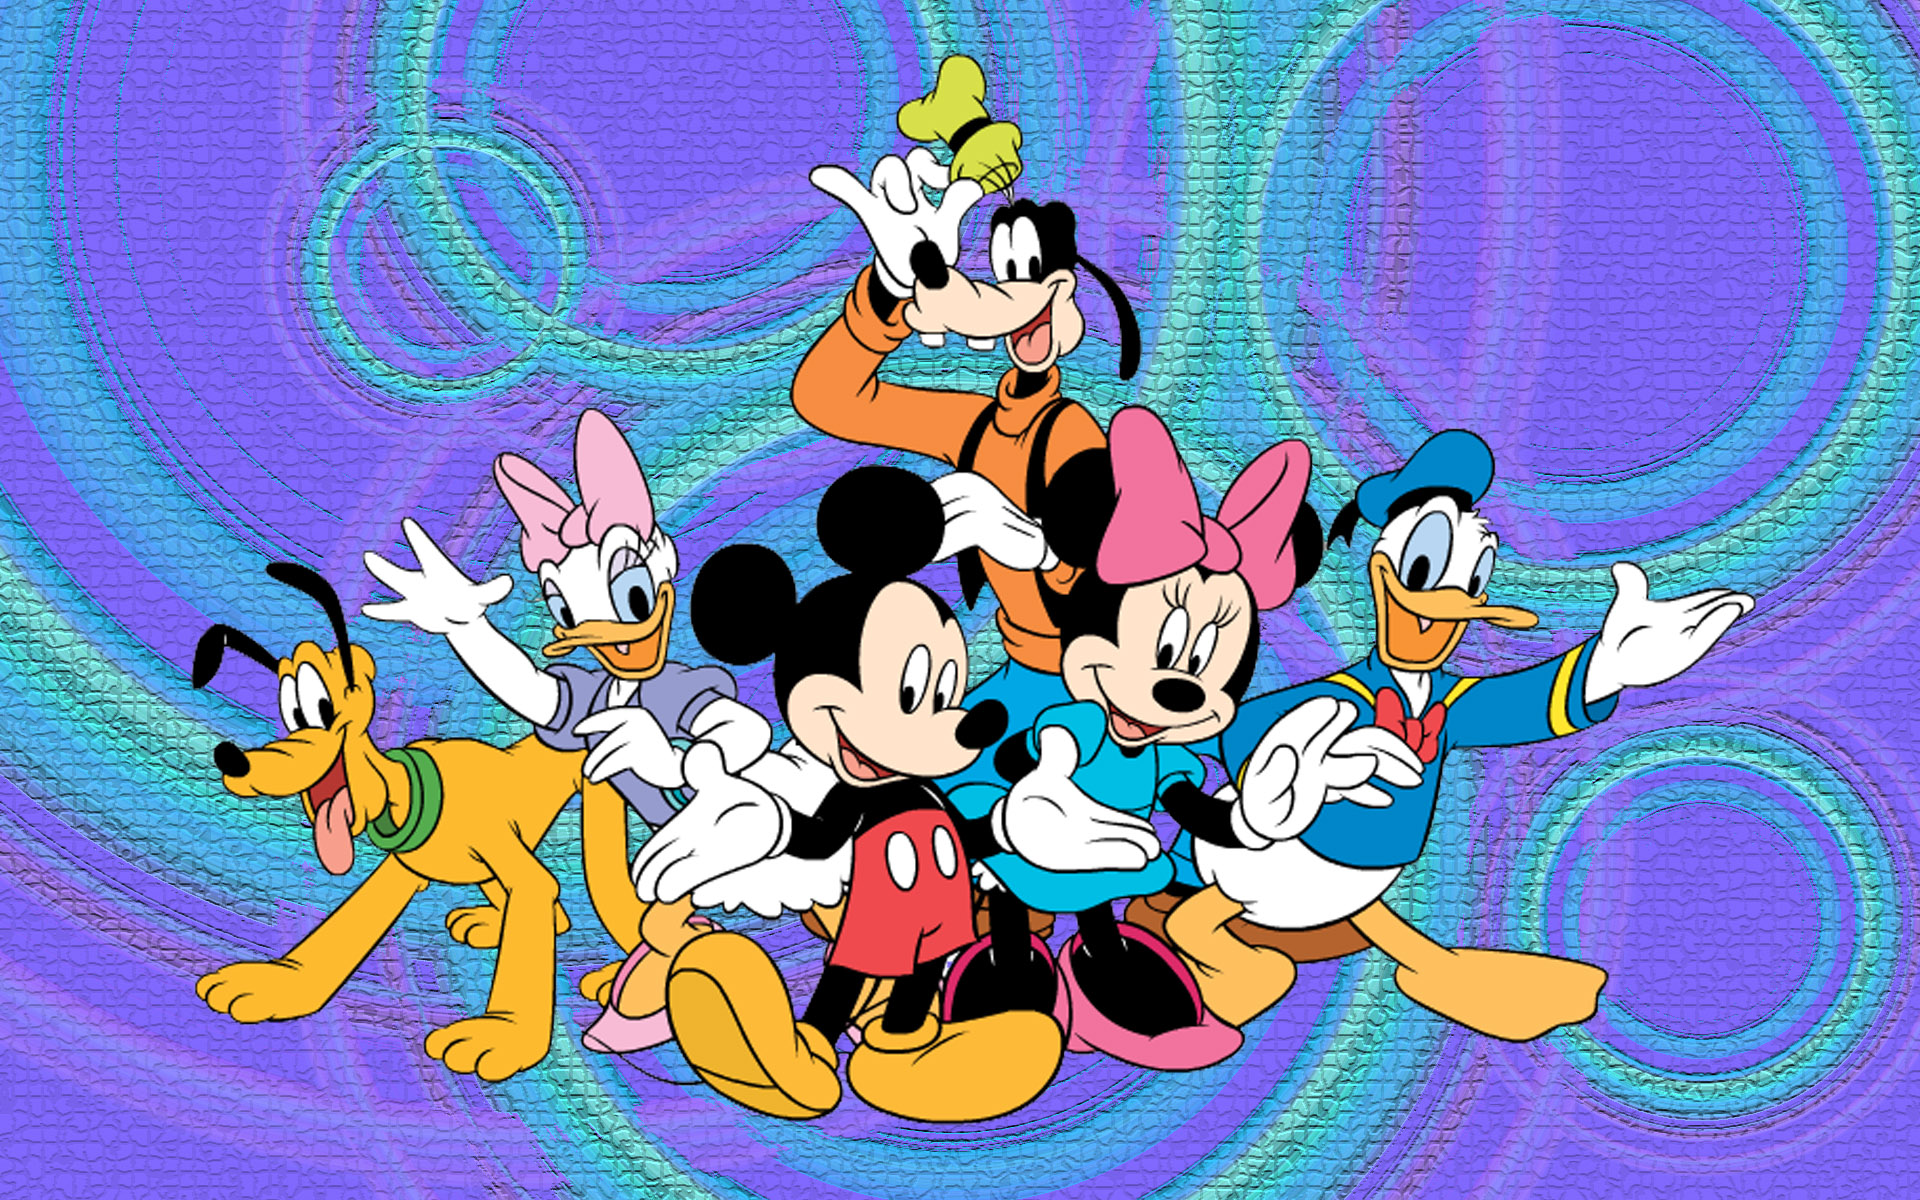 Mickey Mouse And Friends Desktop Wallpaper Hd For Mobile Phones And Laptops  1920x1200 : 